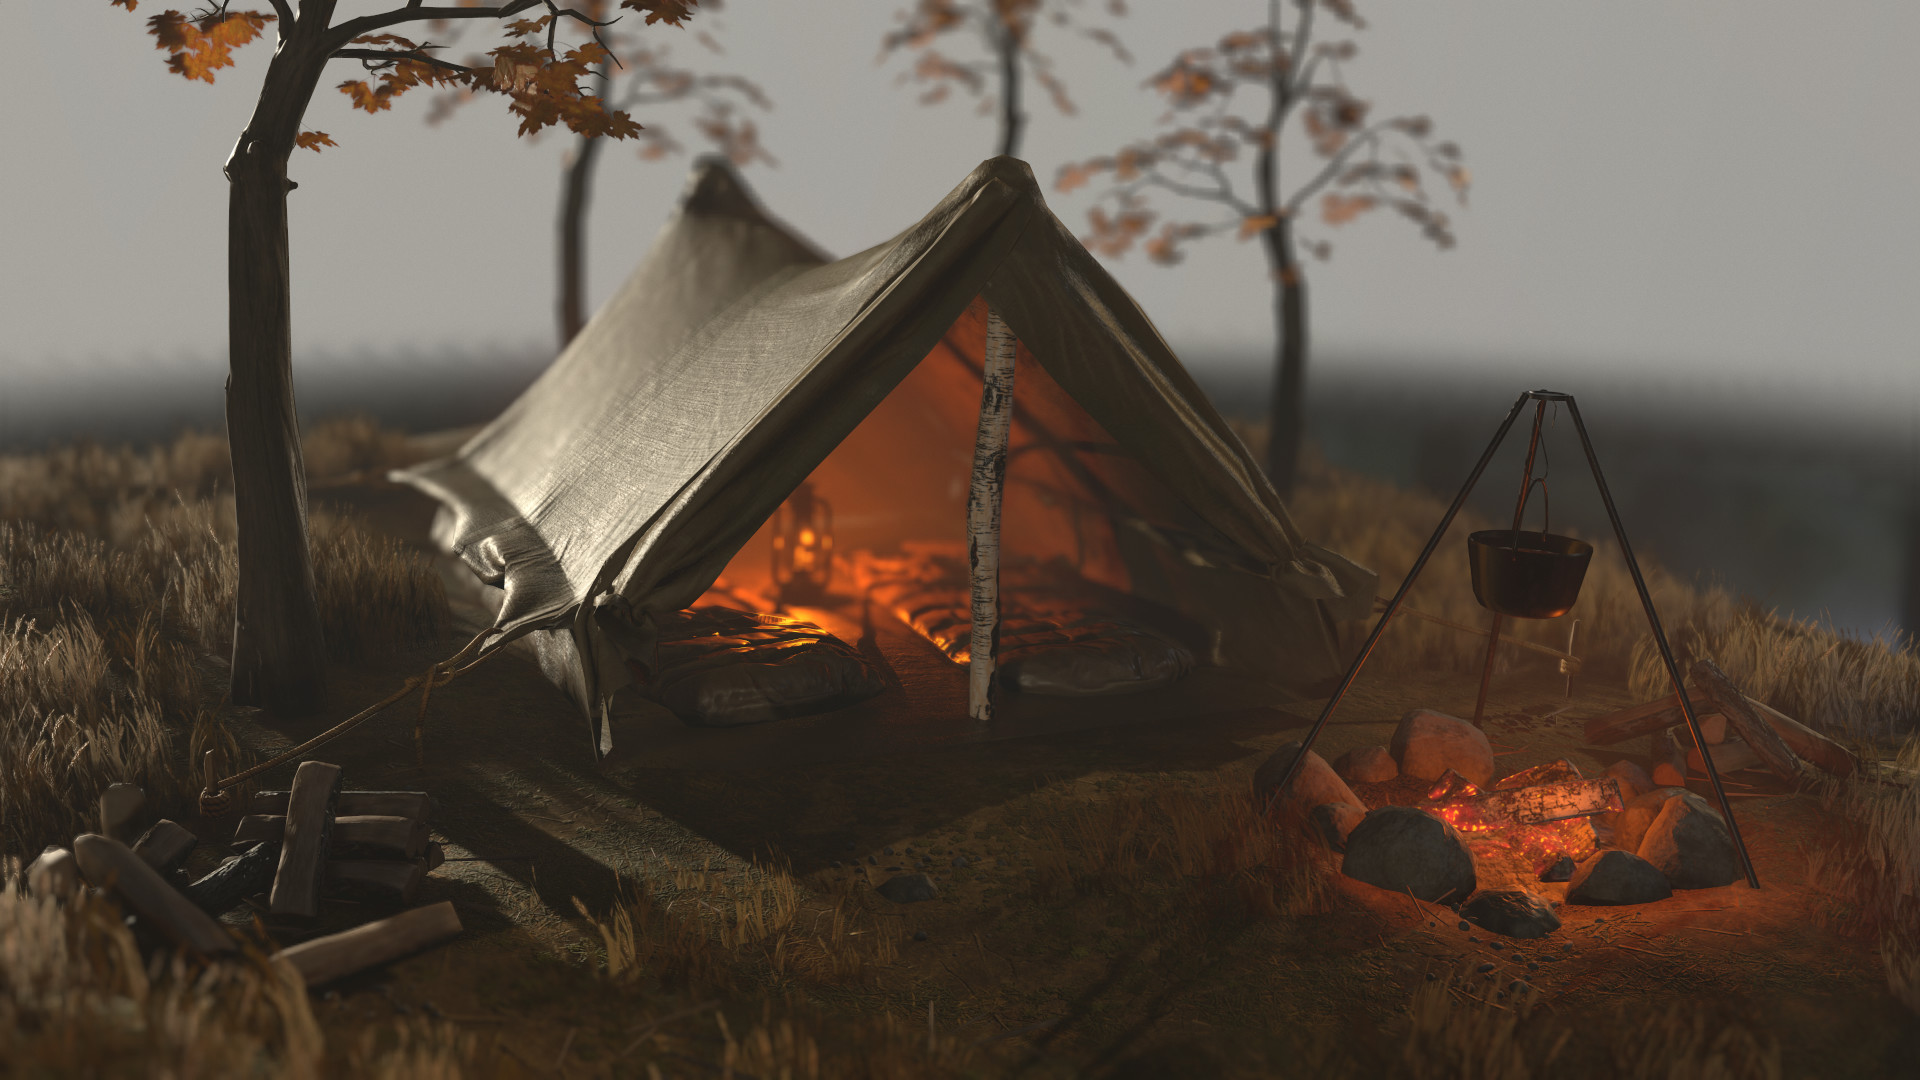 ArtStation - The camp bed trunk with mattress